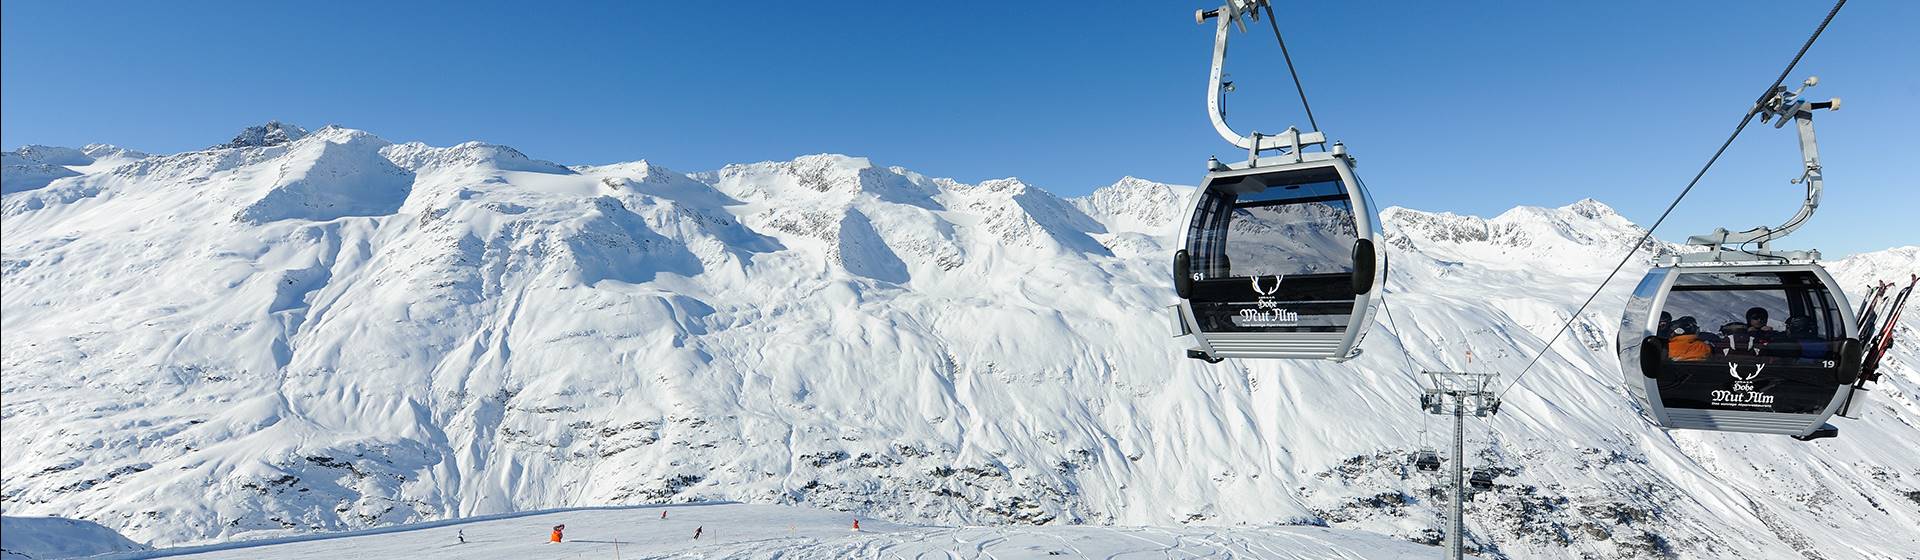 Gondolas in front of a snow-covered mountain landscape